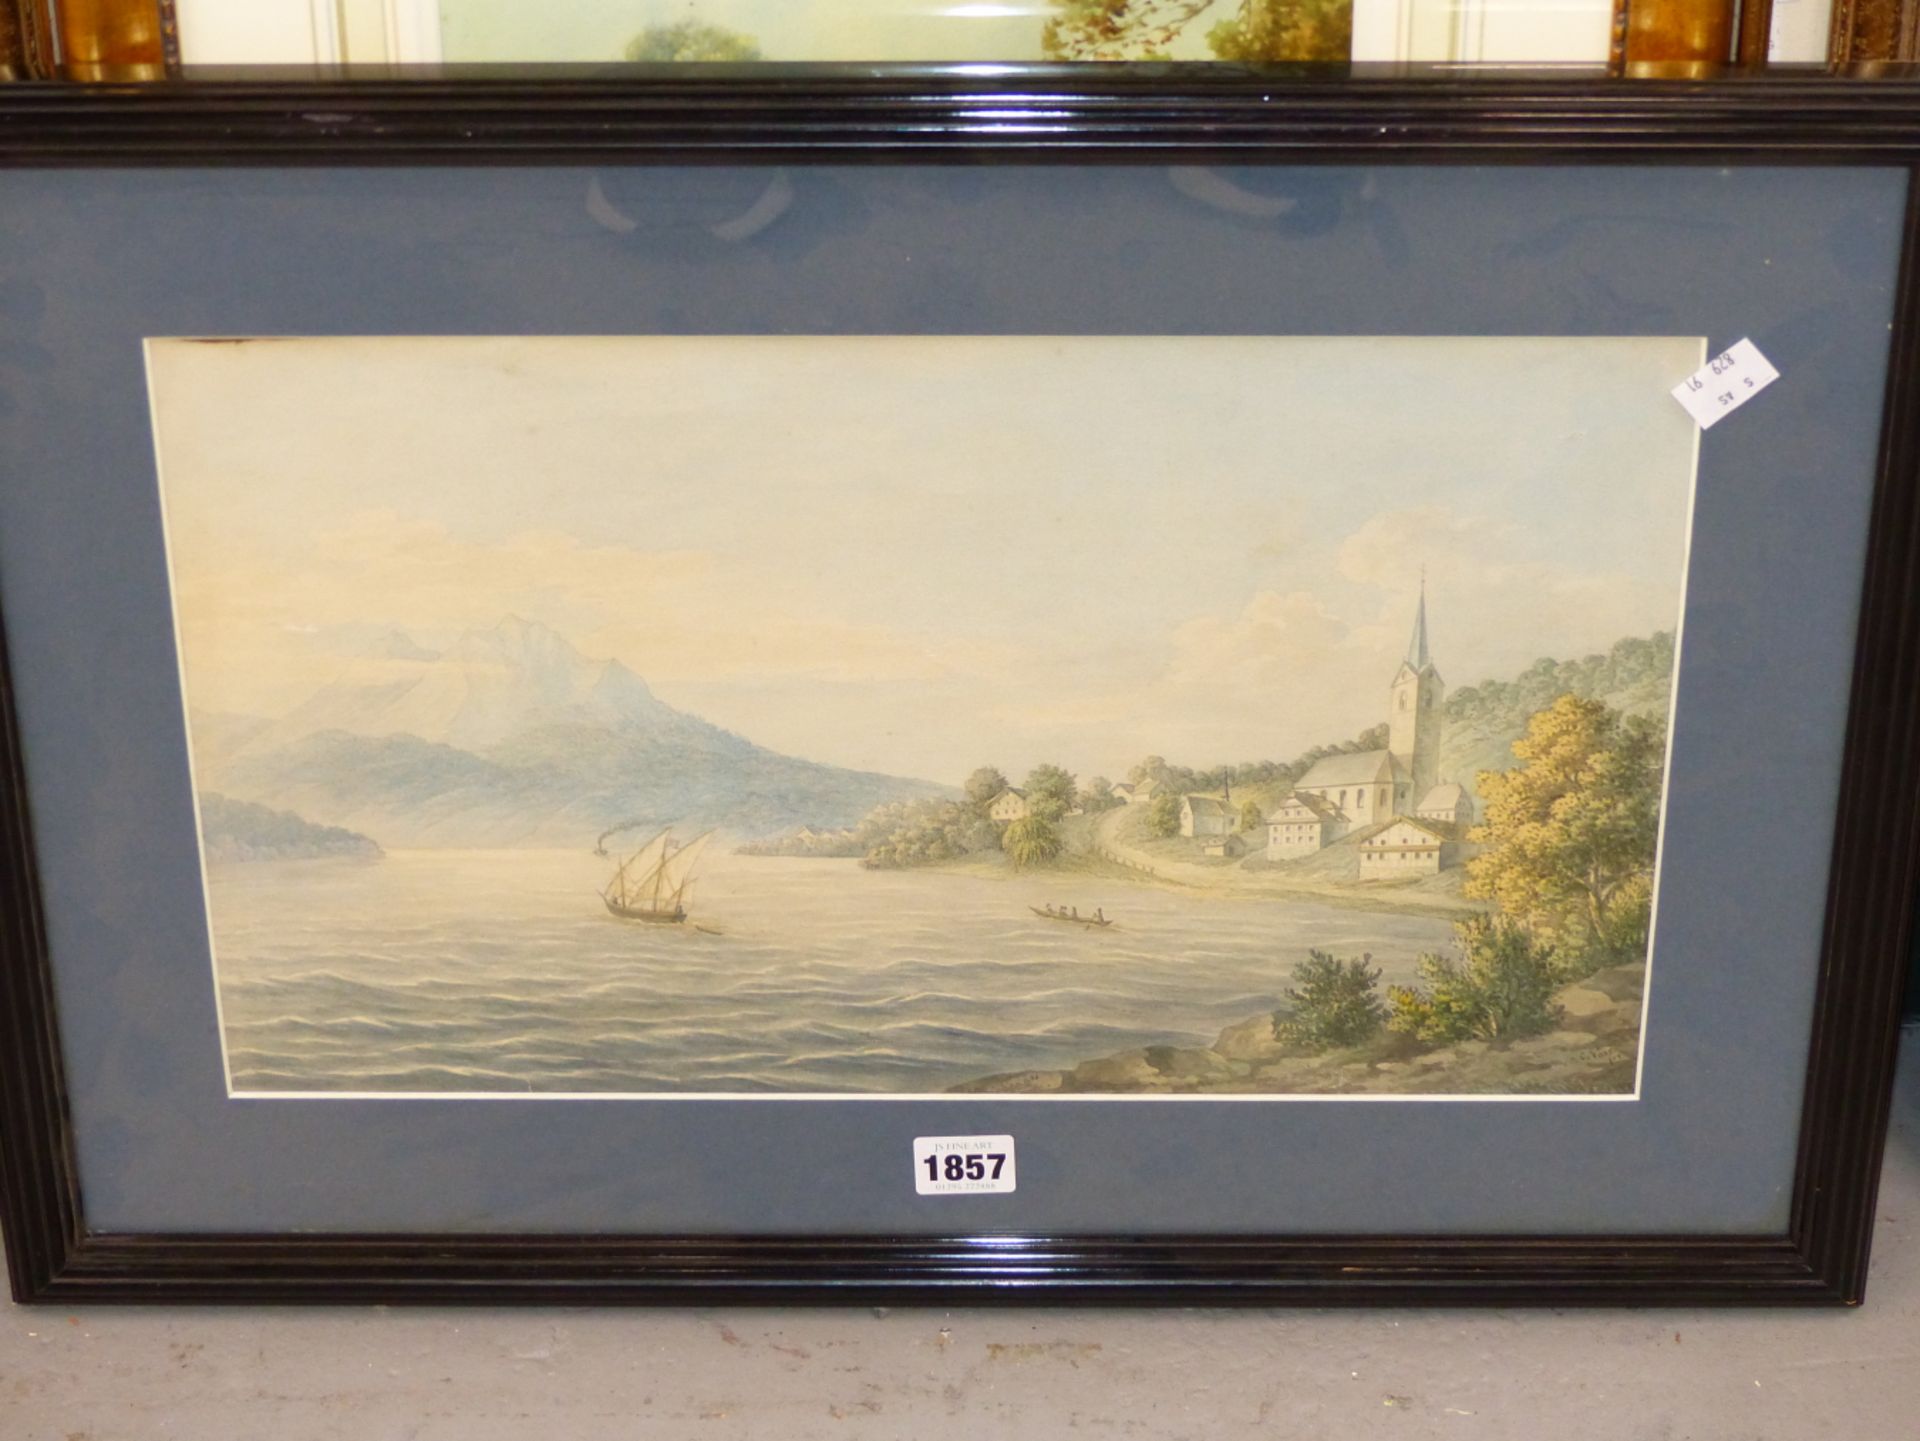 C. VOSS (19TH CENTURY), MOUNTAINOUS LANDSCAPE WITH BOATS ON A LAKE, SIGNED, WATERCOLOUR, 43 X 25. - Image 3 of 4